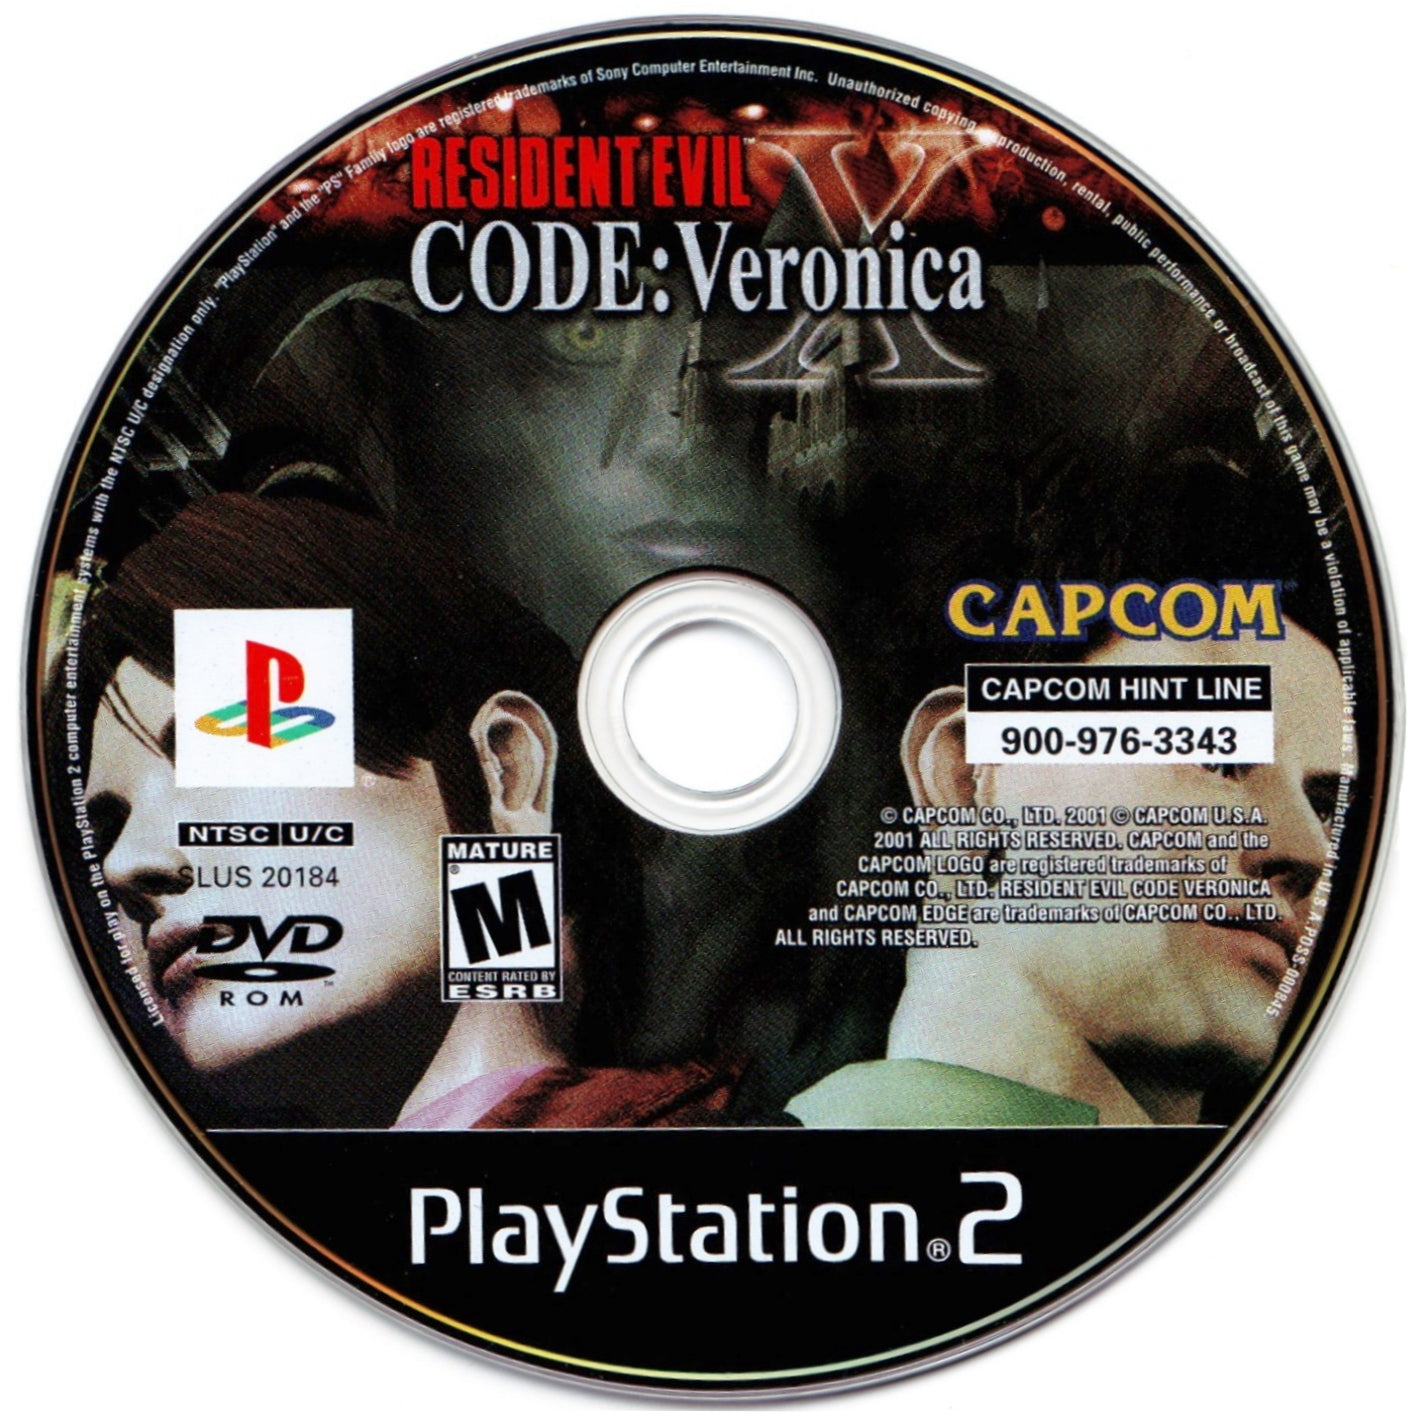 Resident Evil Code: Veronica X - PlayStation 2 (PS2) Game Complete - YourGamingShop.com - Buy, Sell, Trade Video Games Online. 120 Day Warranty. Satisfaction Guaranteed.